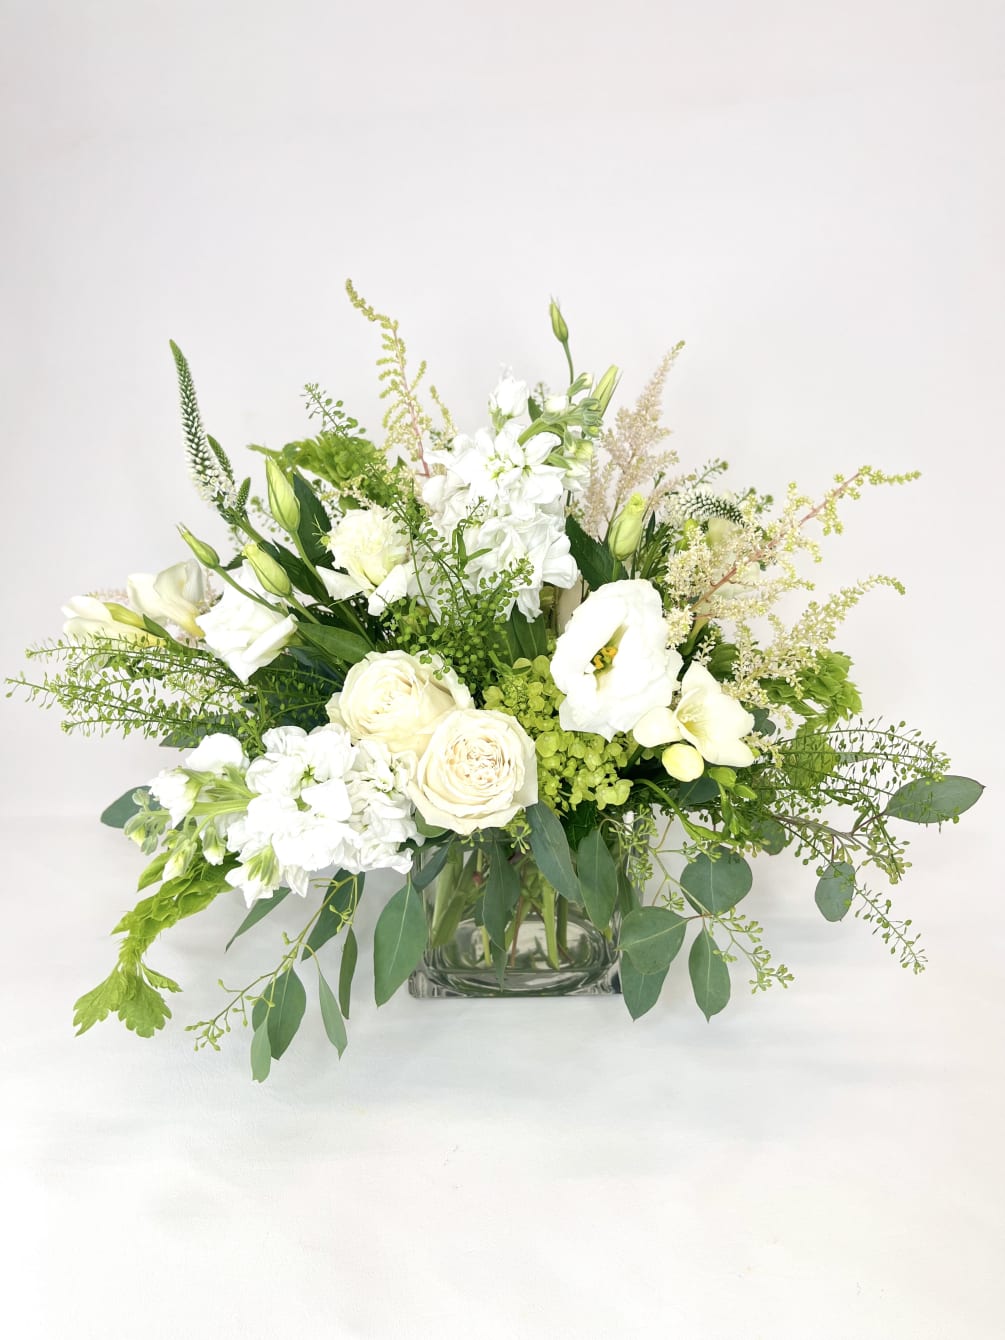 A lovely 5x5 cube with white &amp; mini green hydrangea, dianthus, viburnum